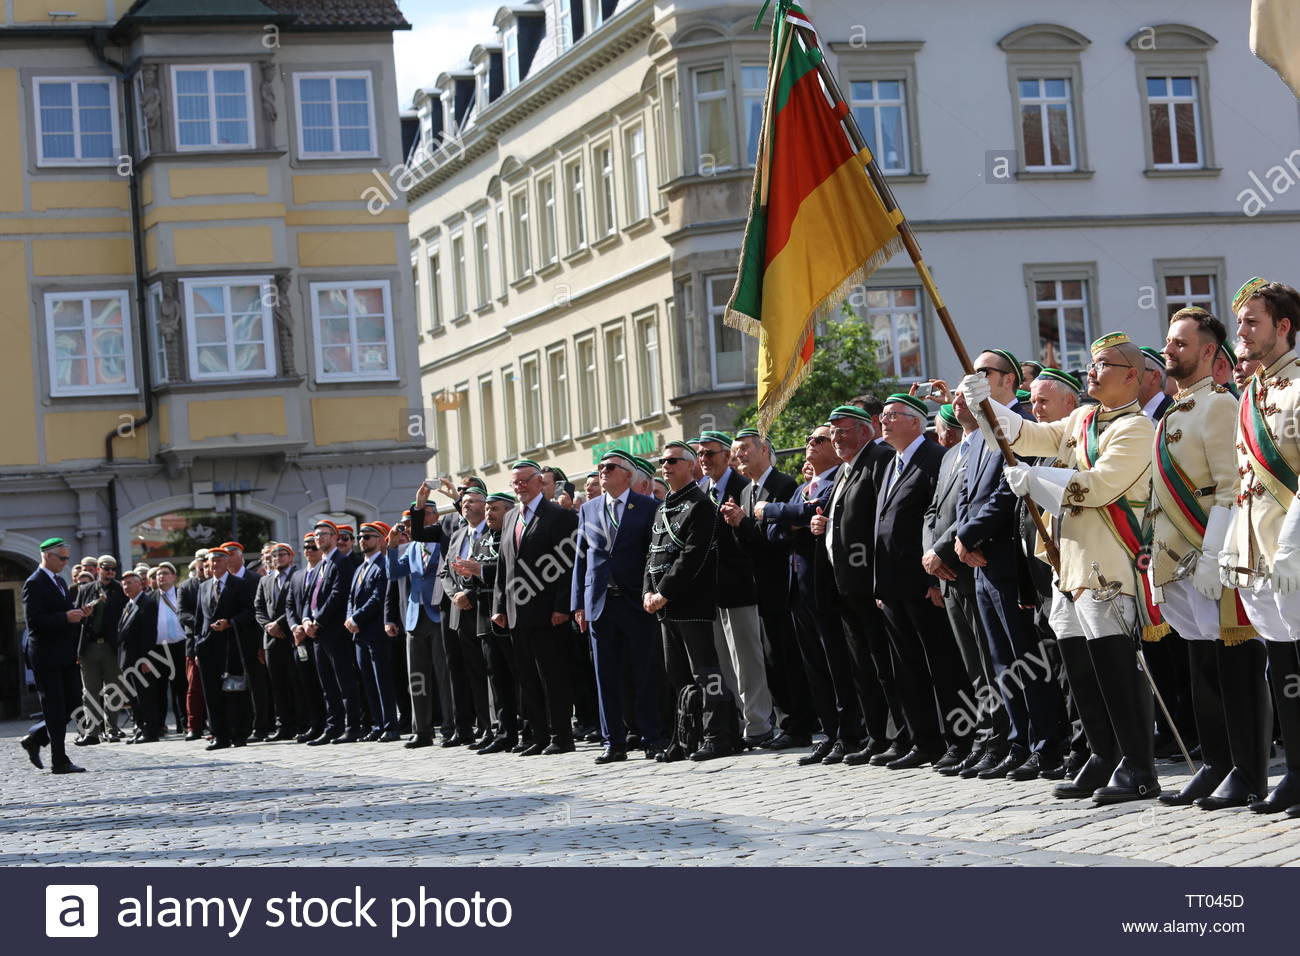 Participants in the opening ceremony of the Coburger Convent in Coburg, Germany. Stock Photo